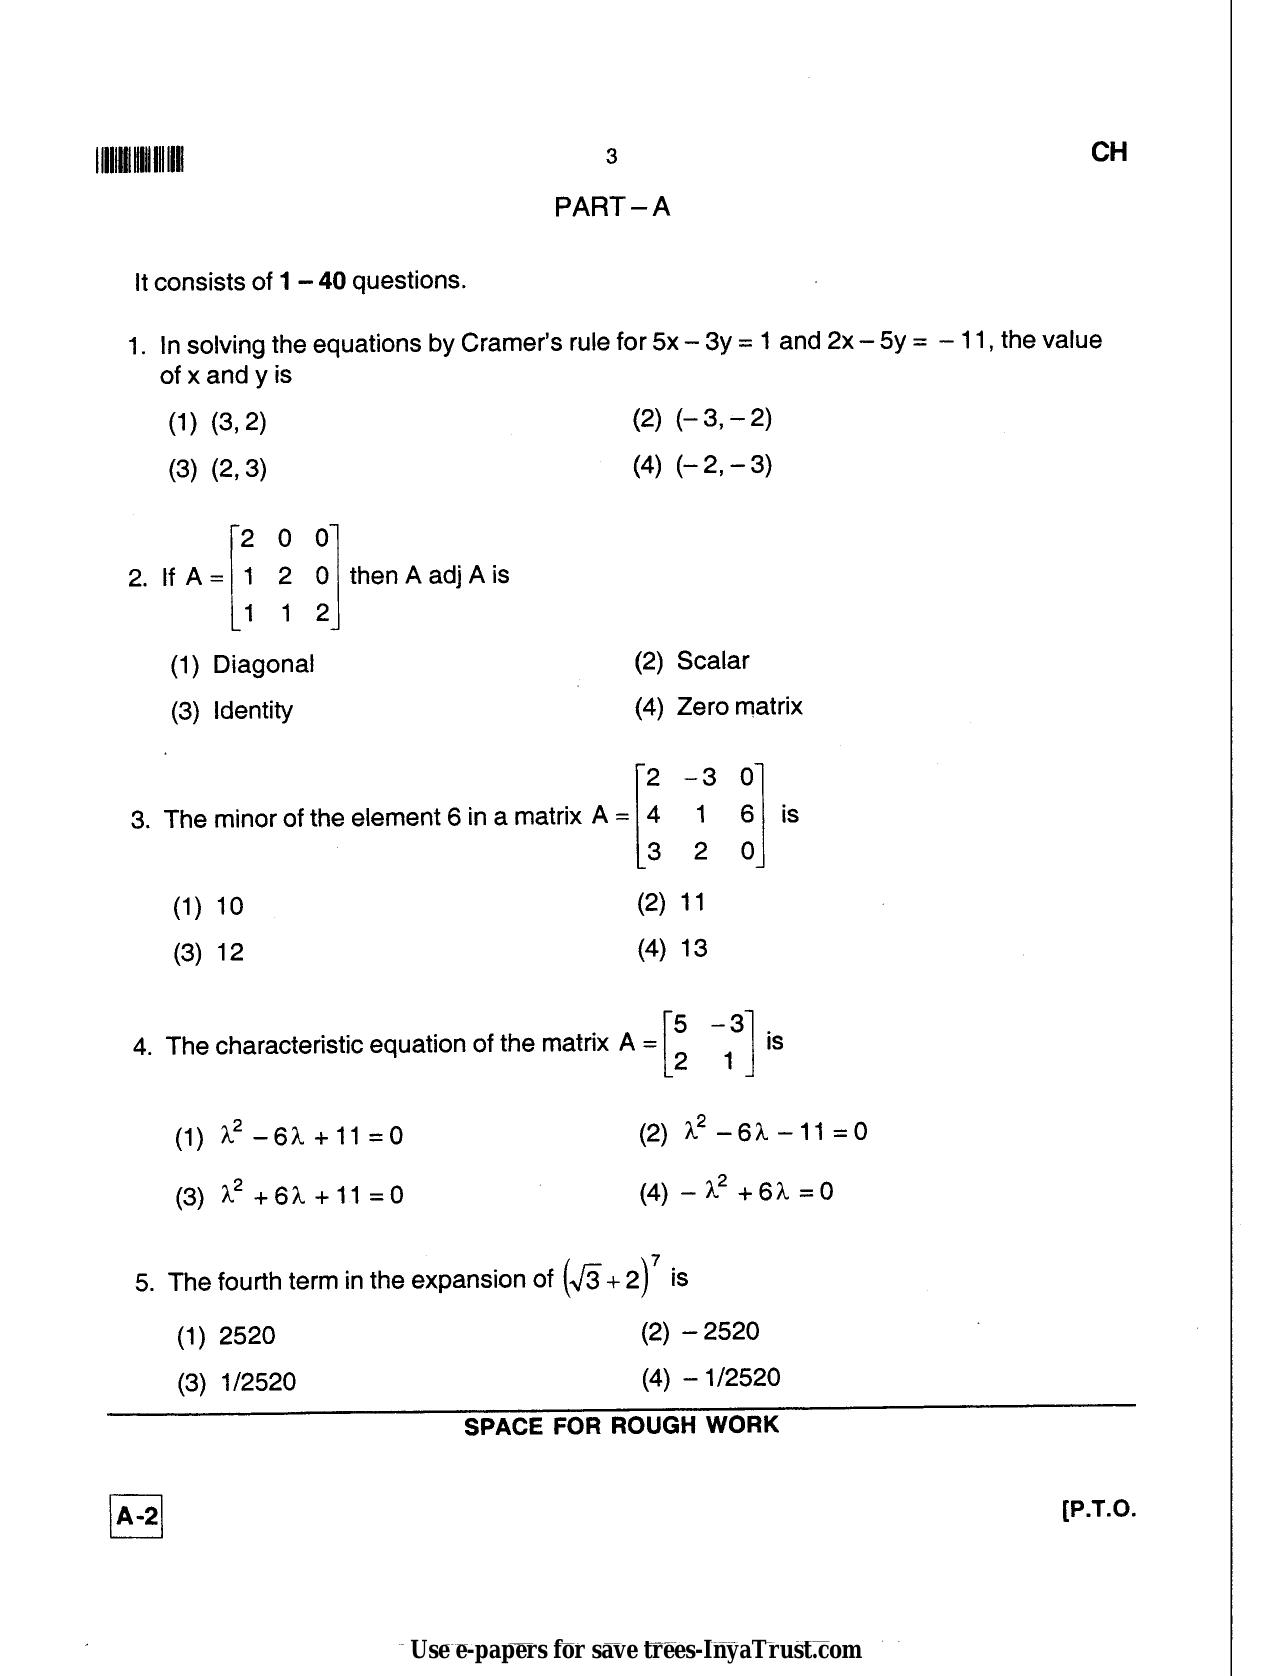 Karnataka Diploma CET- 2013 Chemical Engineering / Polymer Technology Question Paper - Page 3